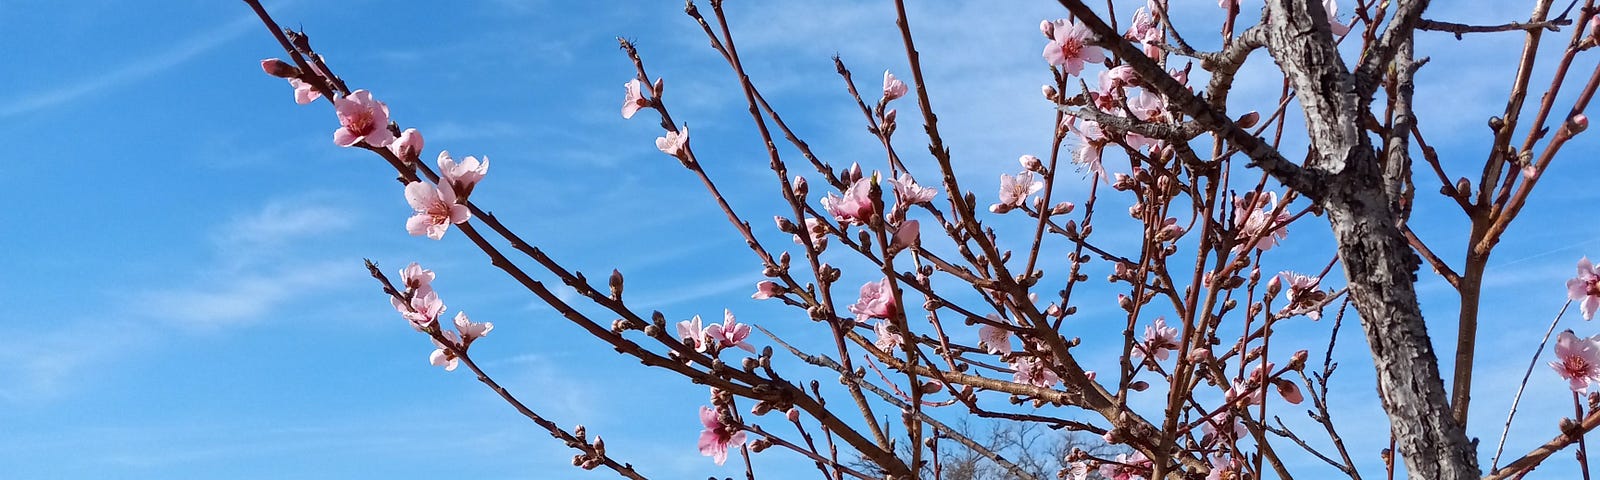 Blooming apricot tree against a blue sky for the story Too Much Stress by Jonica Bradley